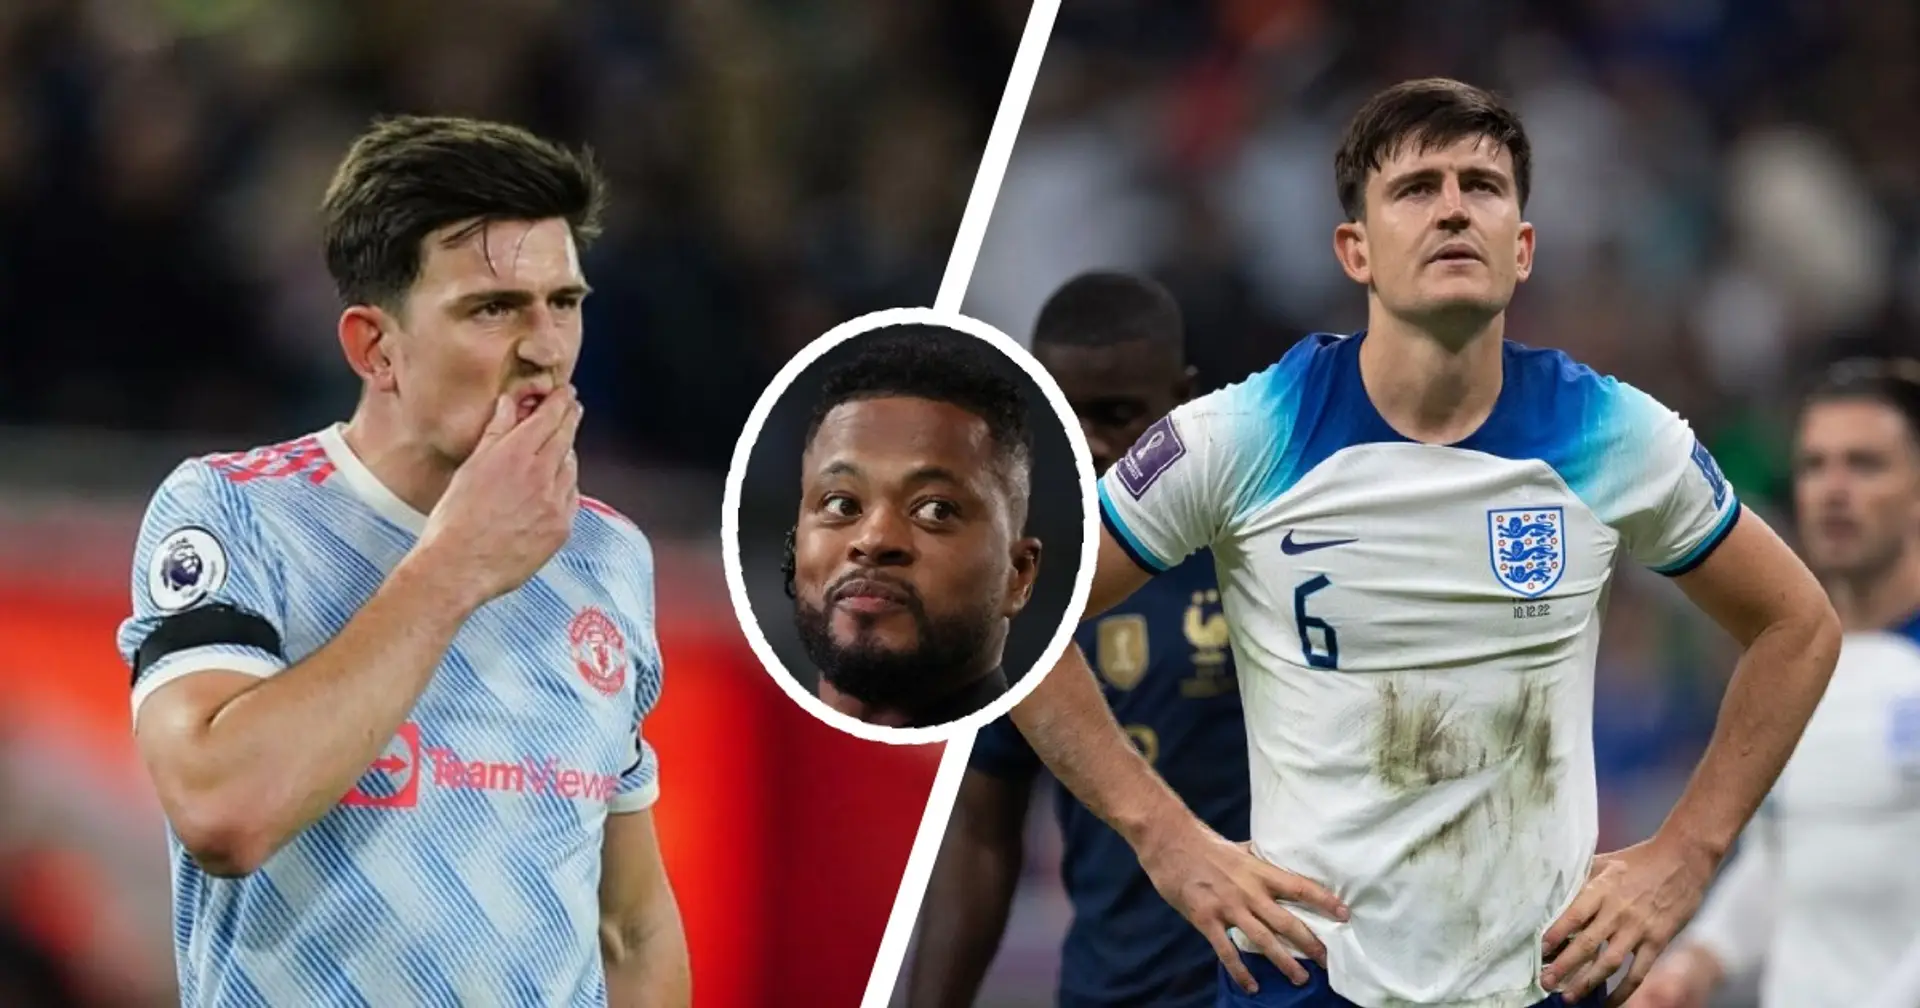 Evra: Man United players don't respect and support Maguire 